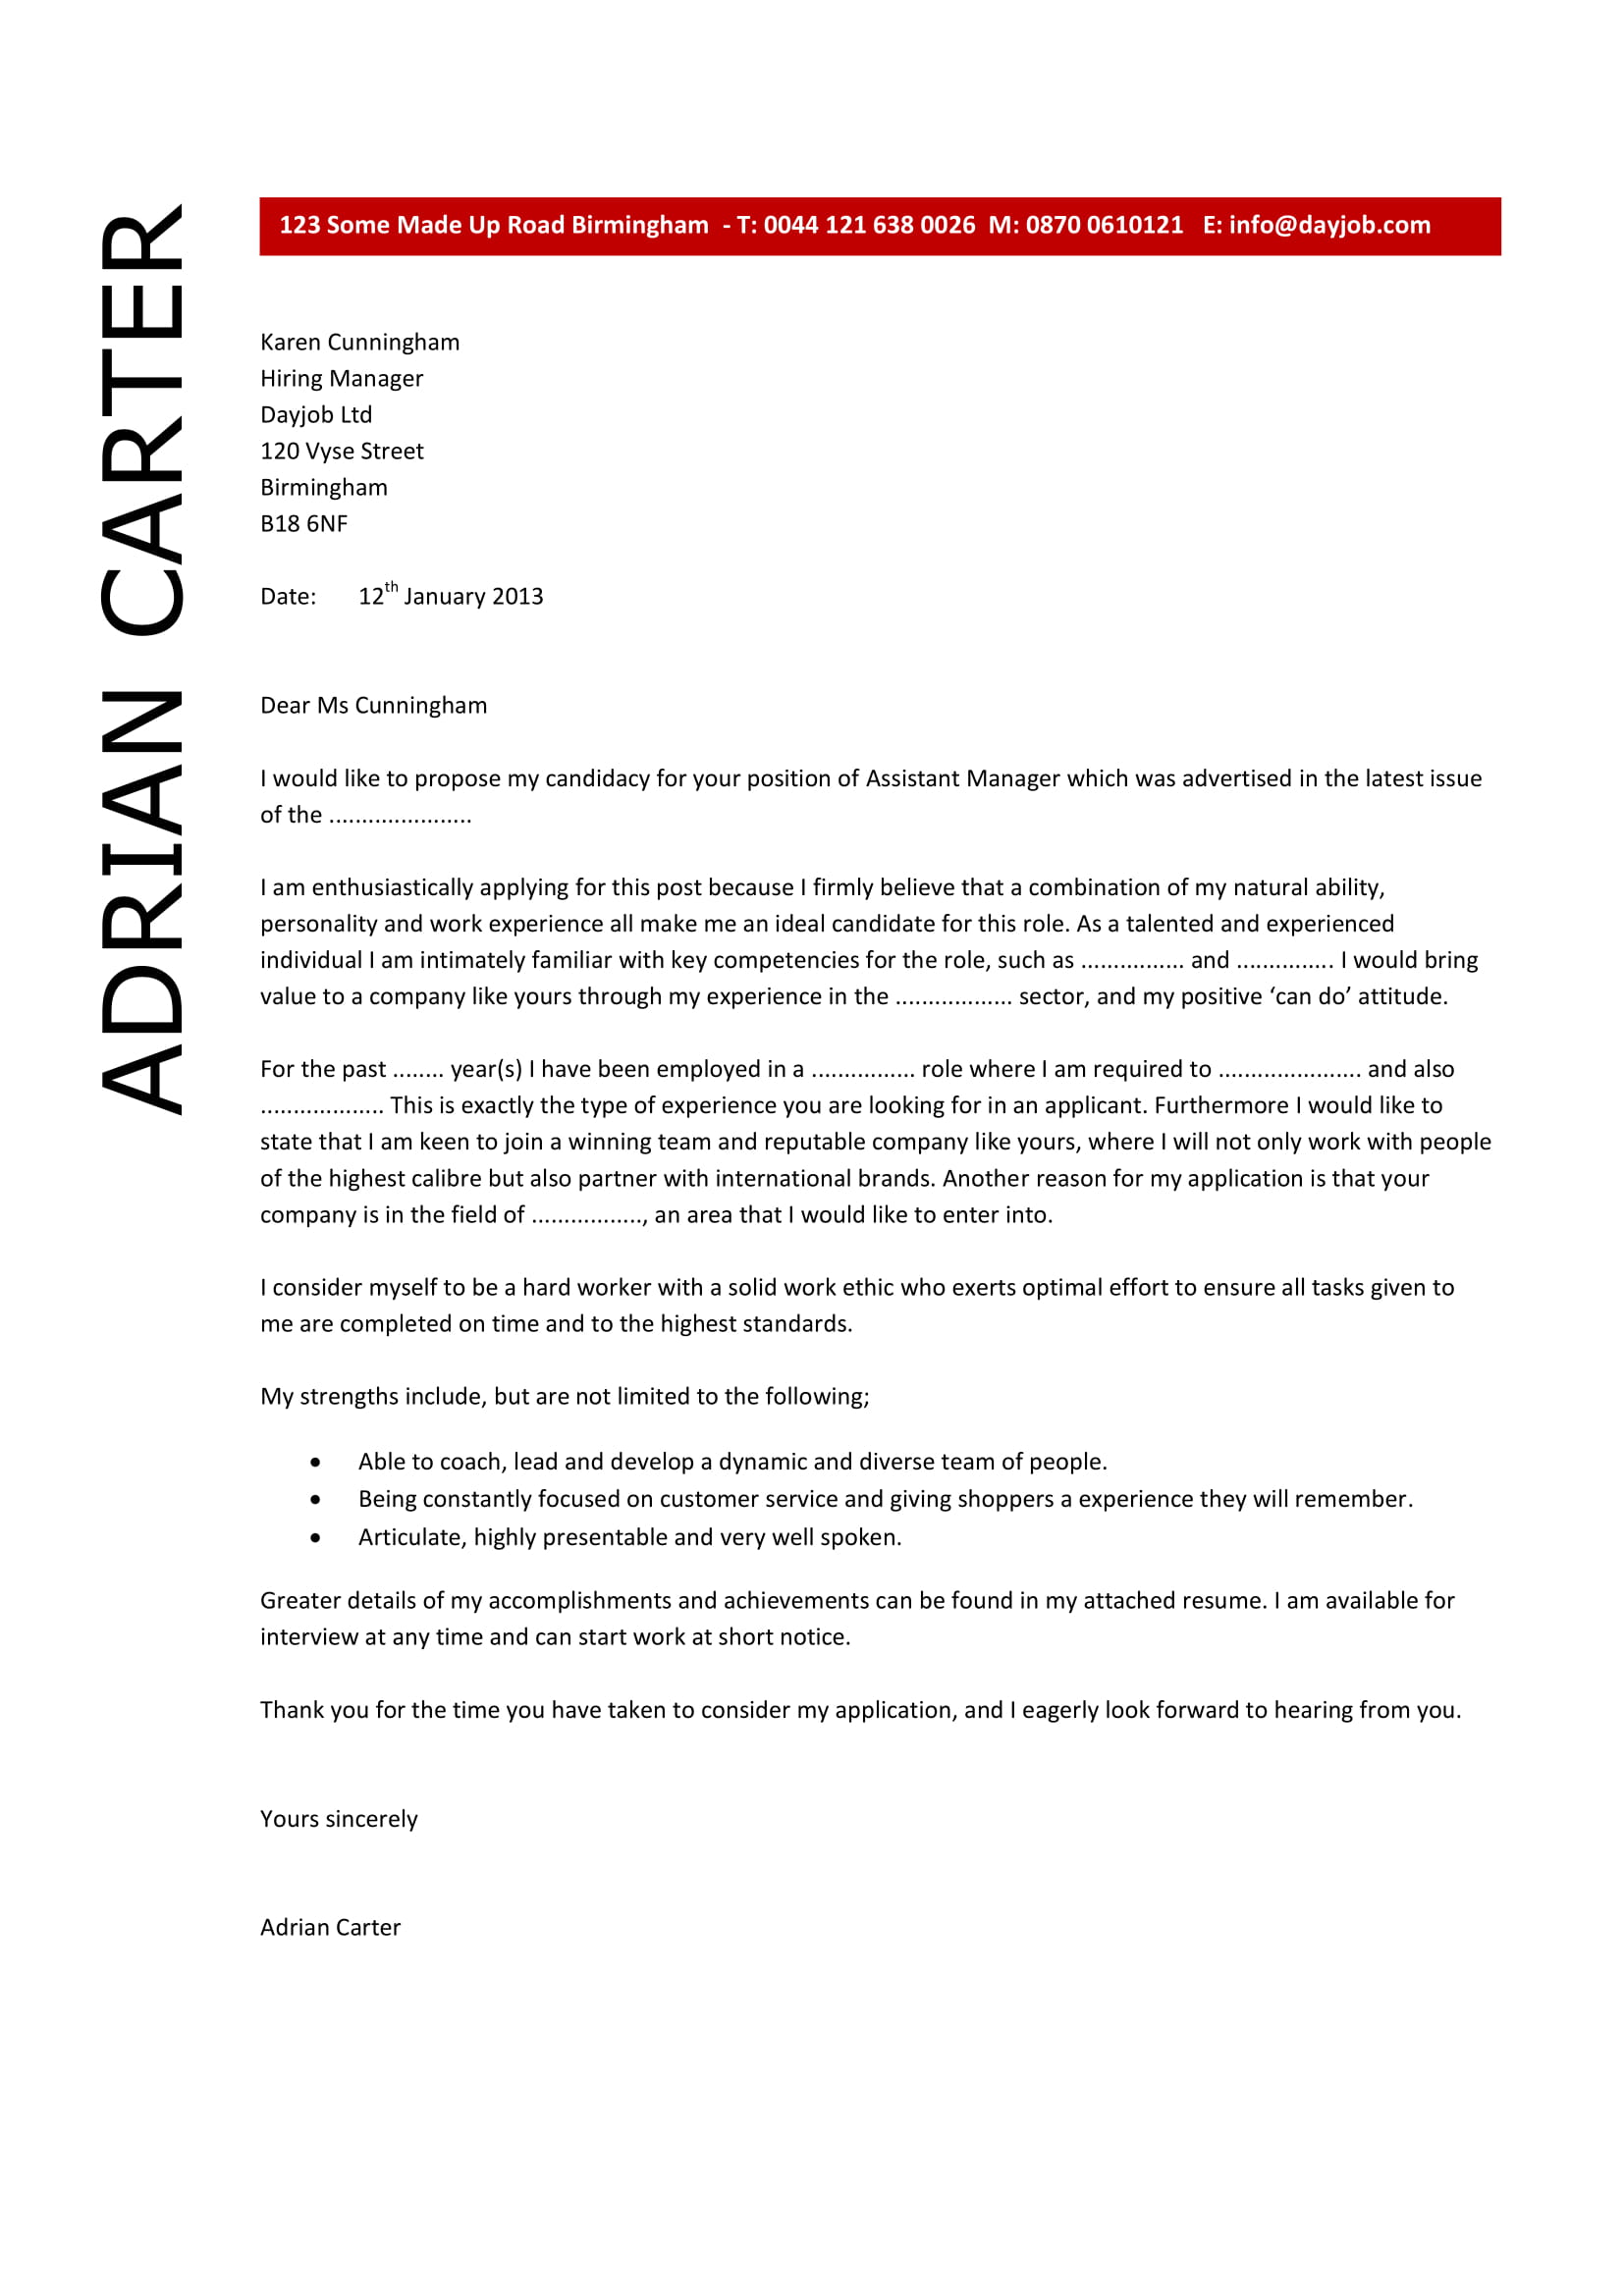 Free Cover Letter - 41+ Examples, Format, Sample | Examples